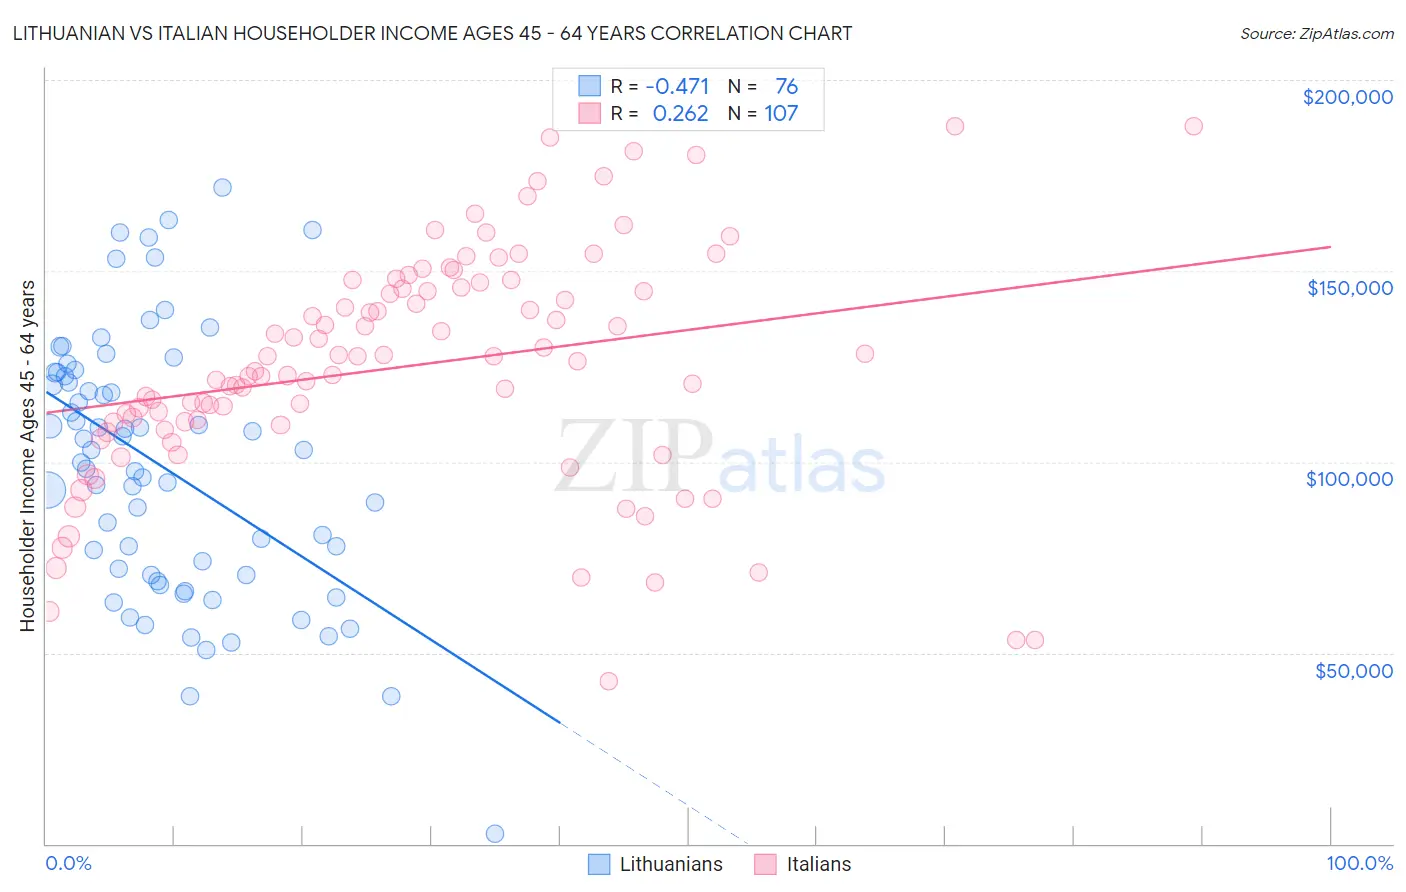 Lithuanian vs Italian Householder Income Ages 45 - 64 years